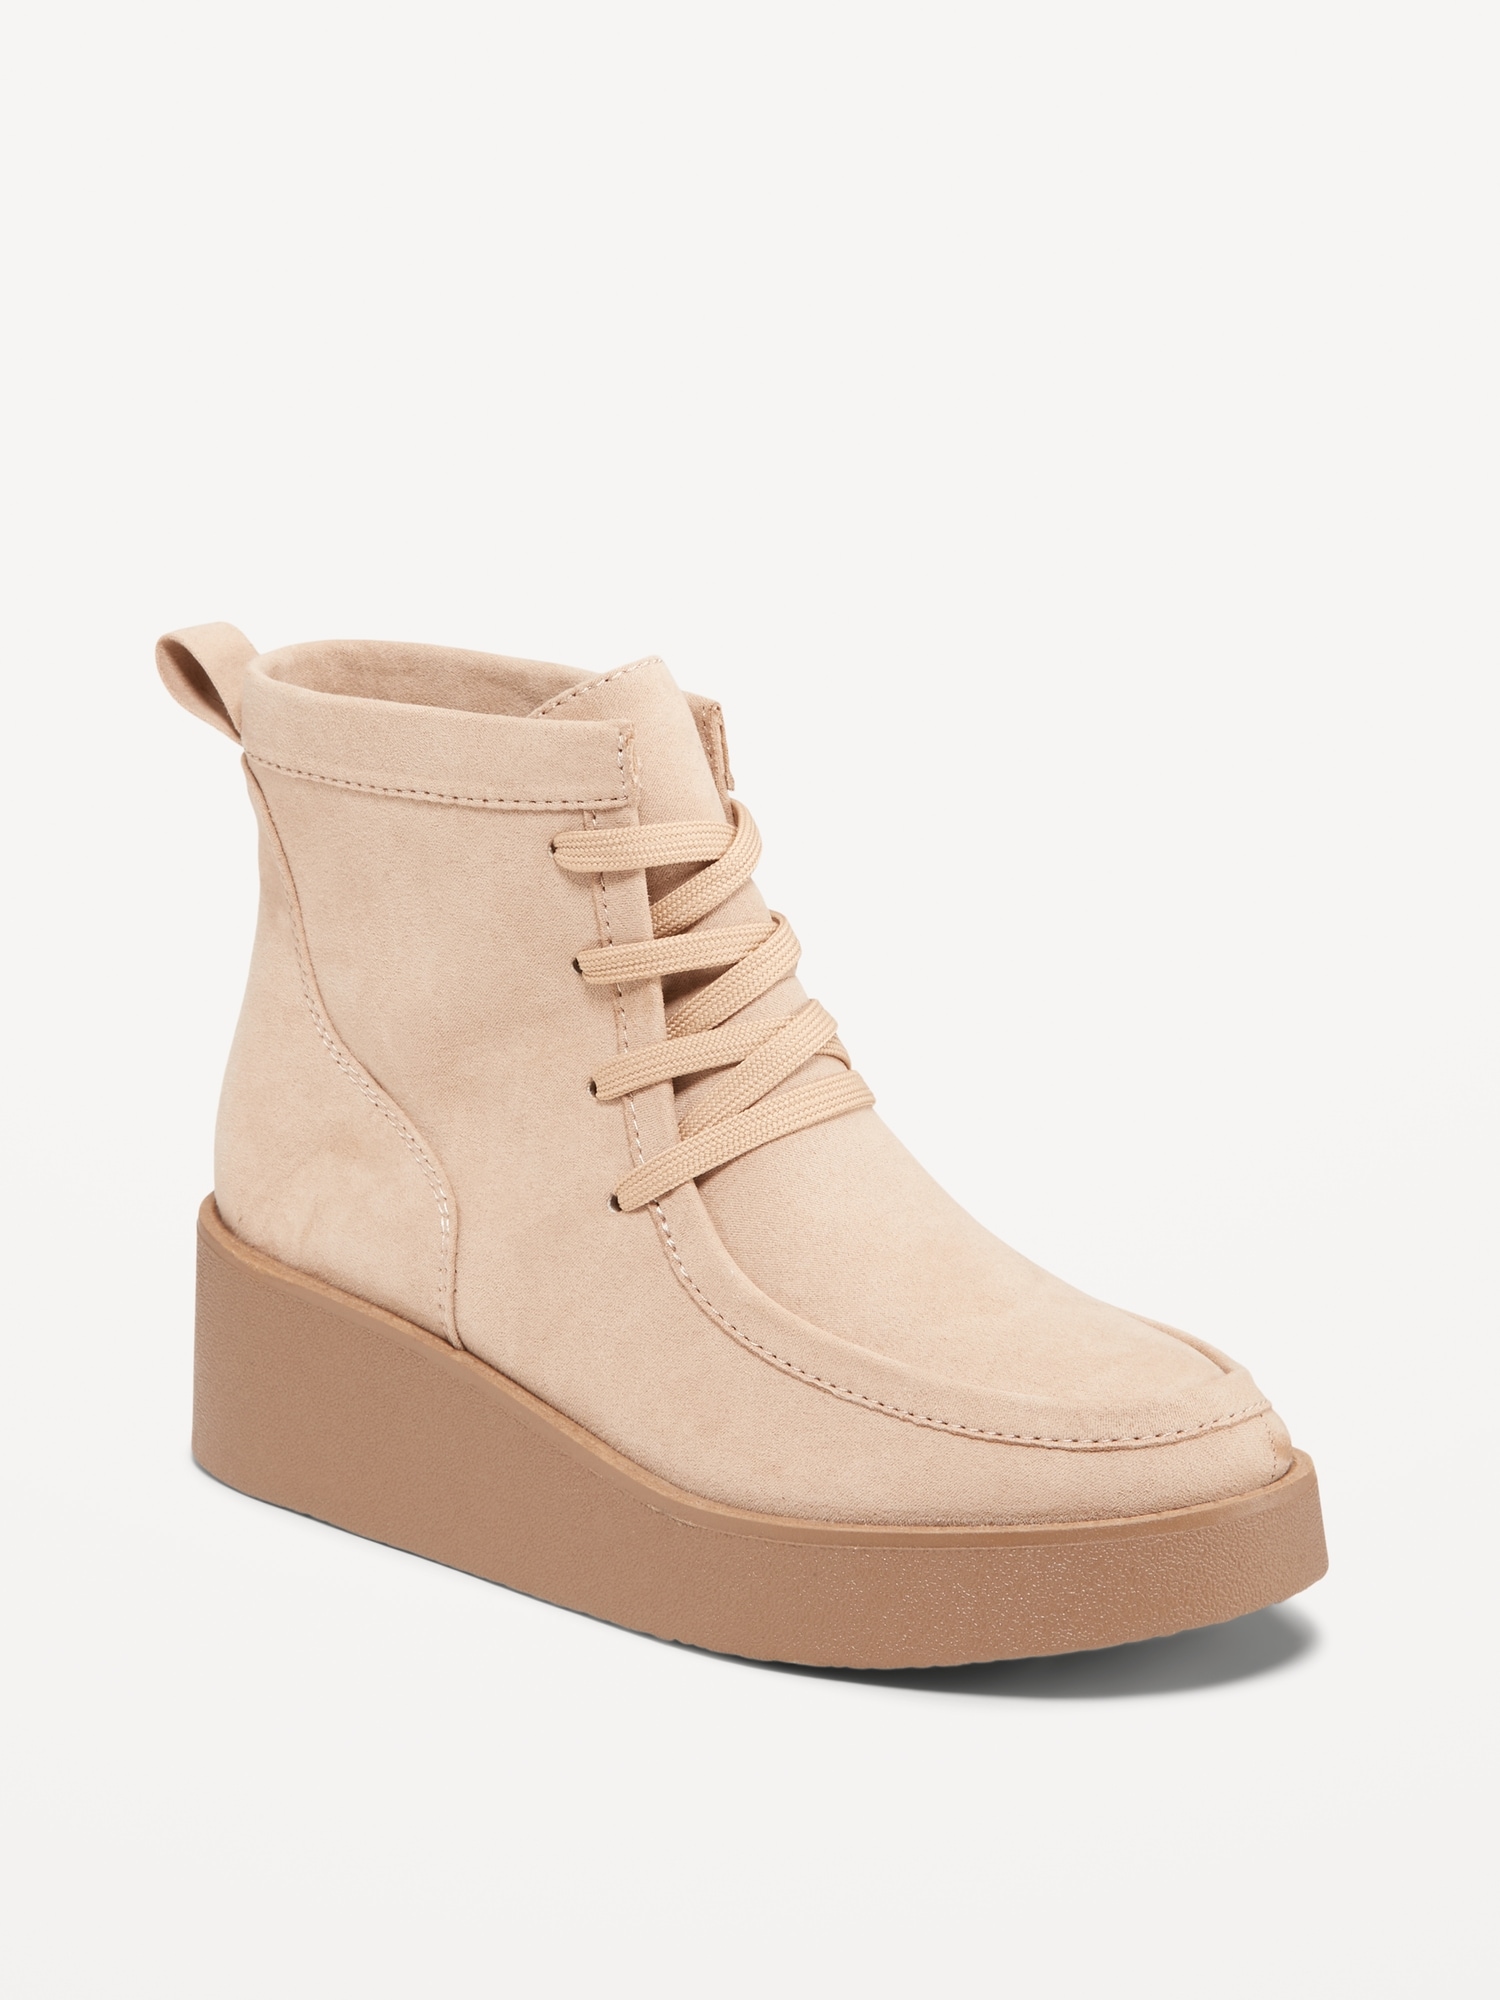 Faux-Suede Wedge Boots for Women